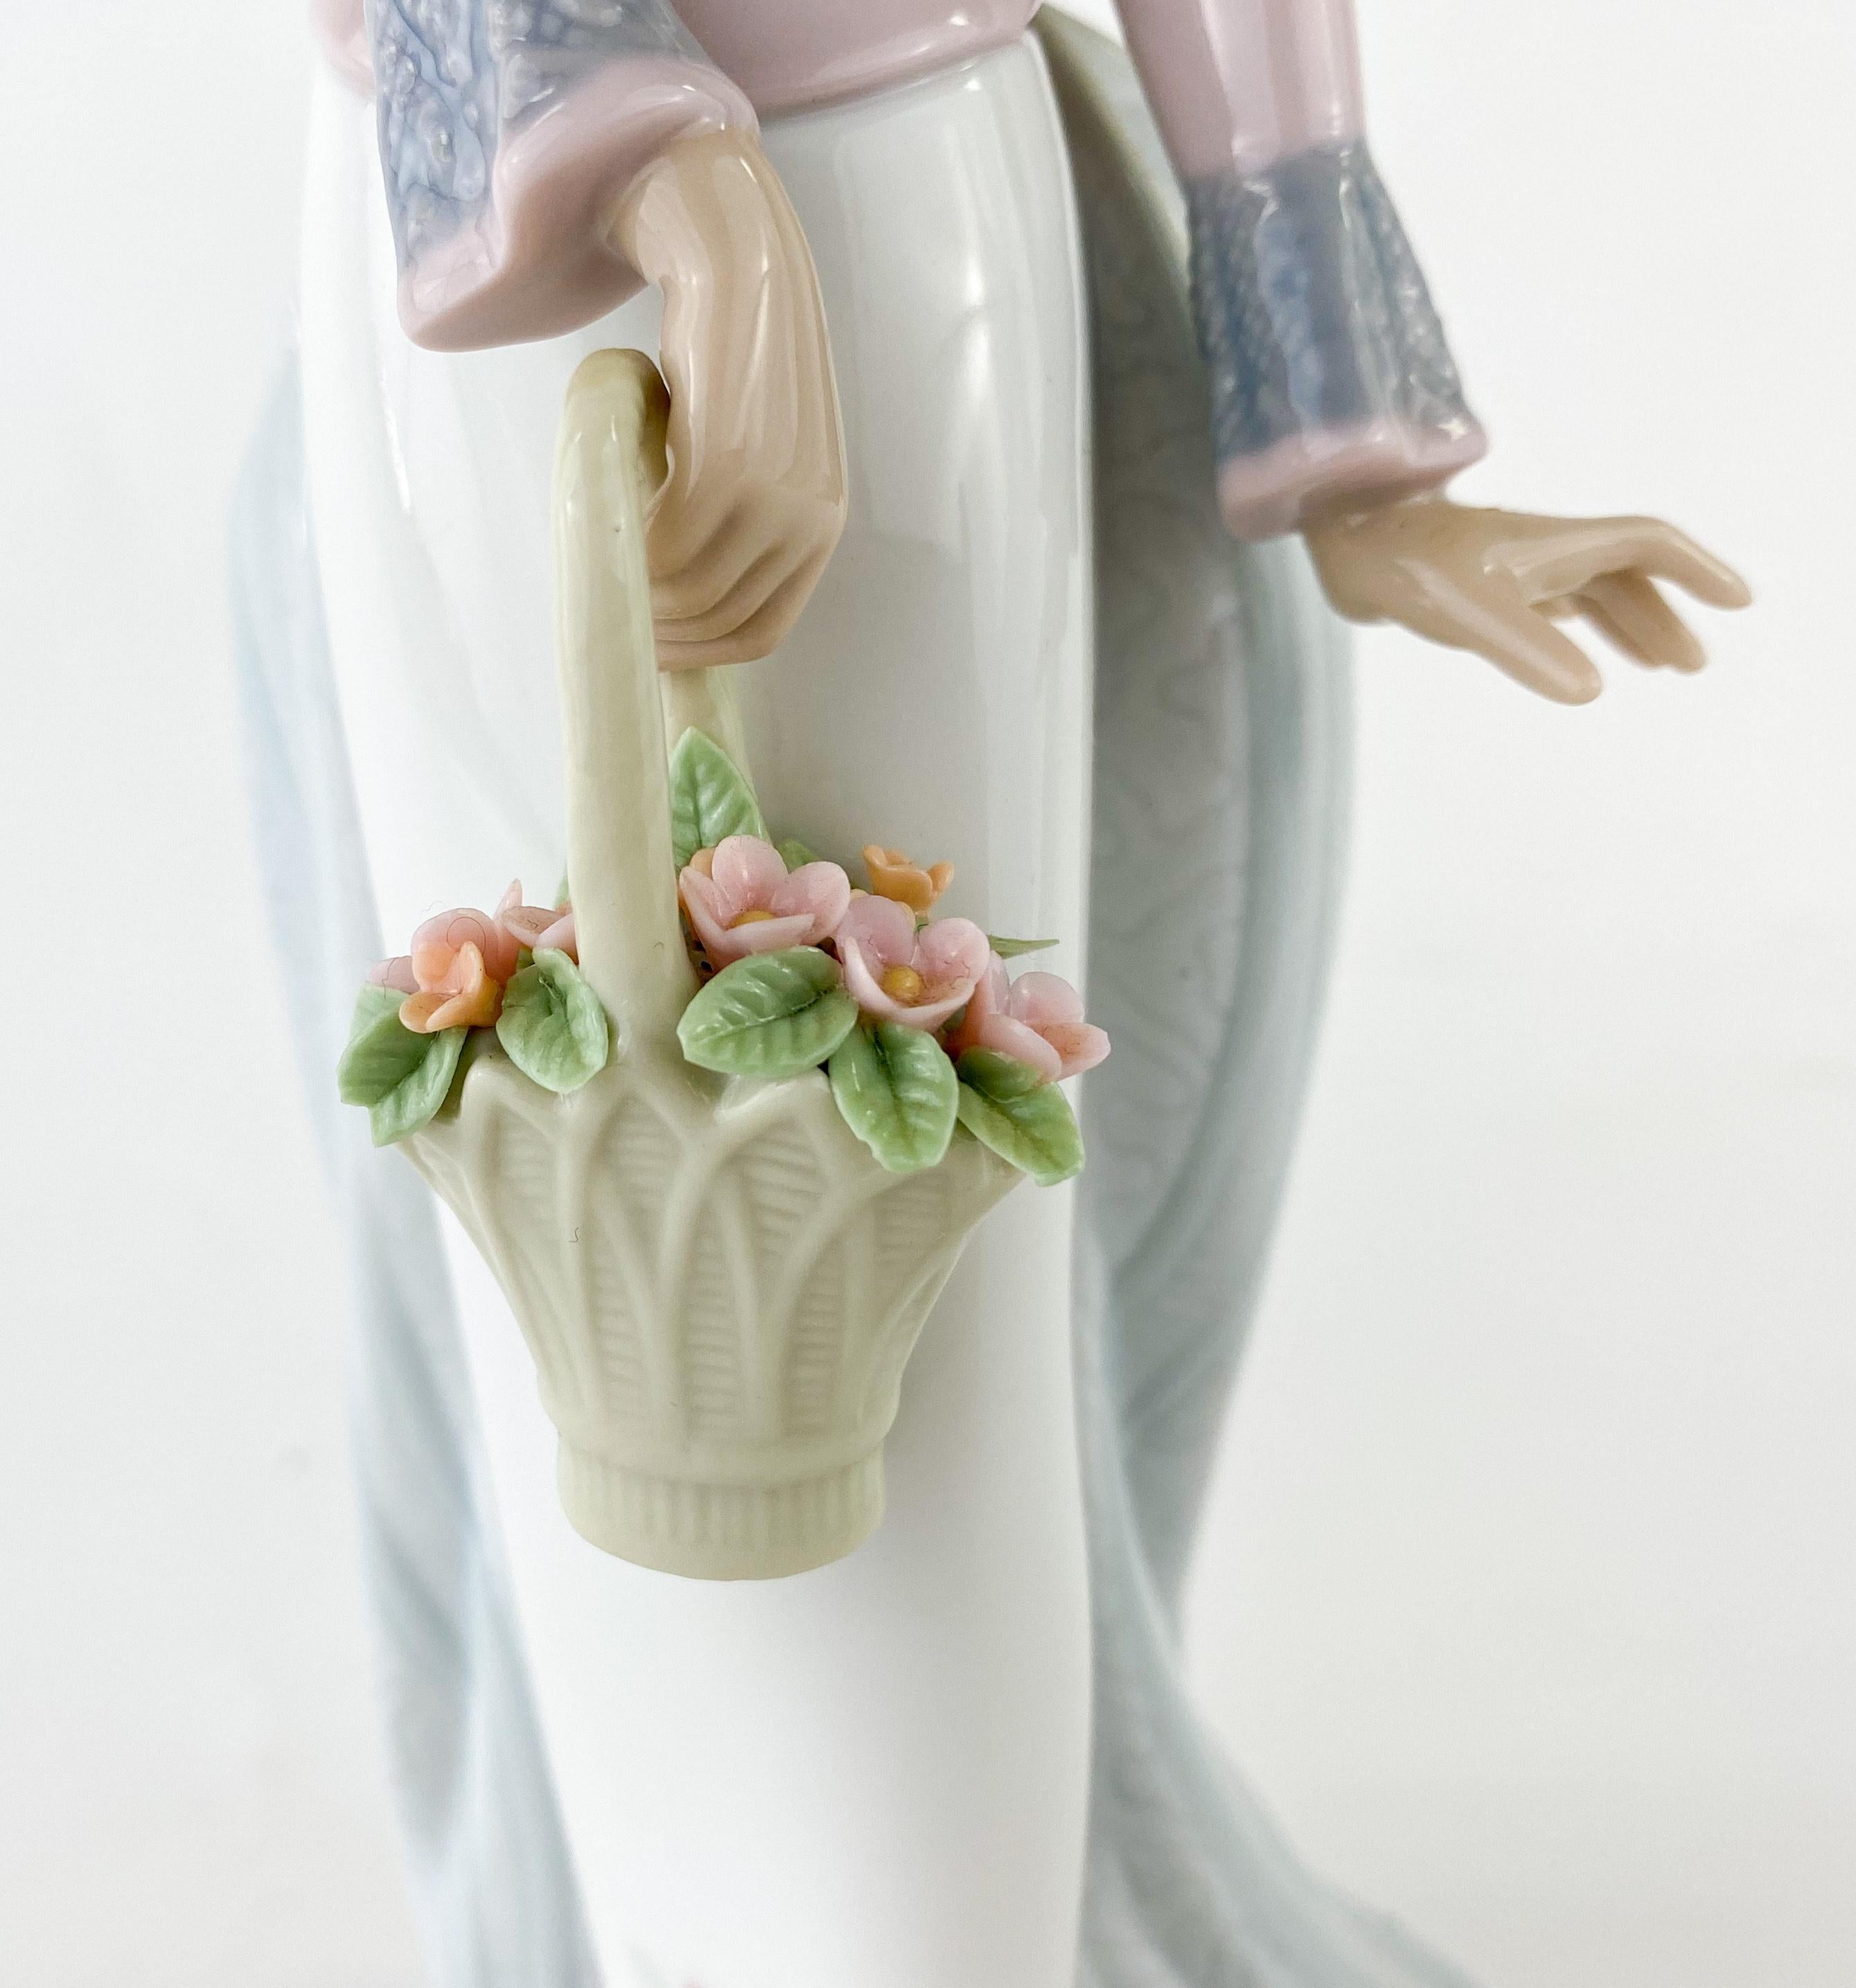 Authentic LLadro Handmade in Spain Figurine, a Set of 3, Retired Models In Good Condition For Sale In Plainview, NY